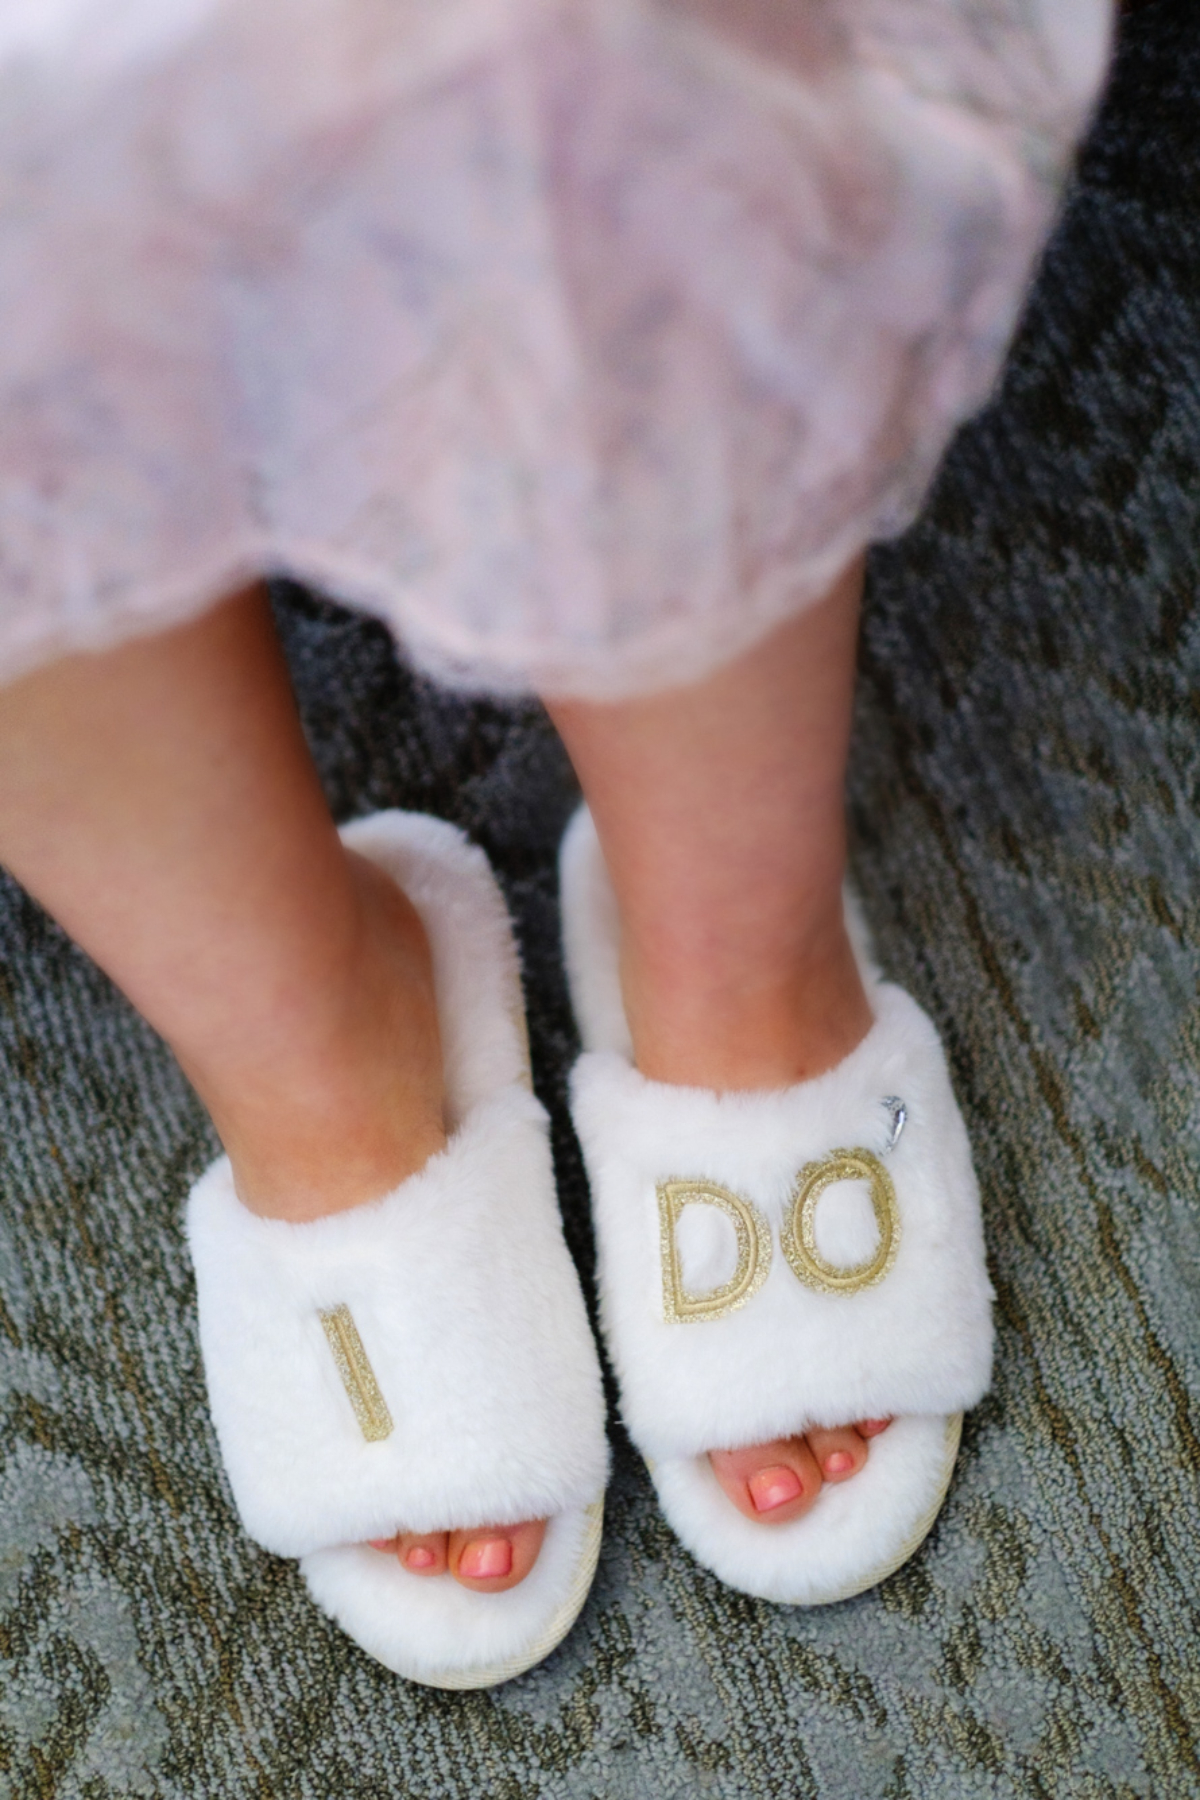 i do slippers for the bride during getting ready photos